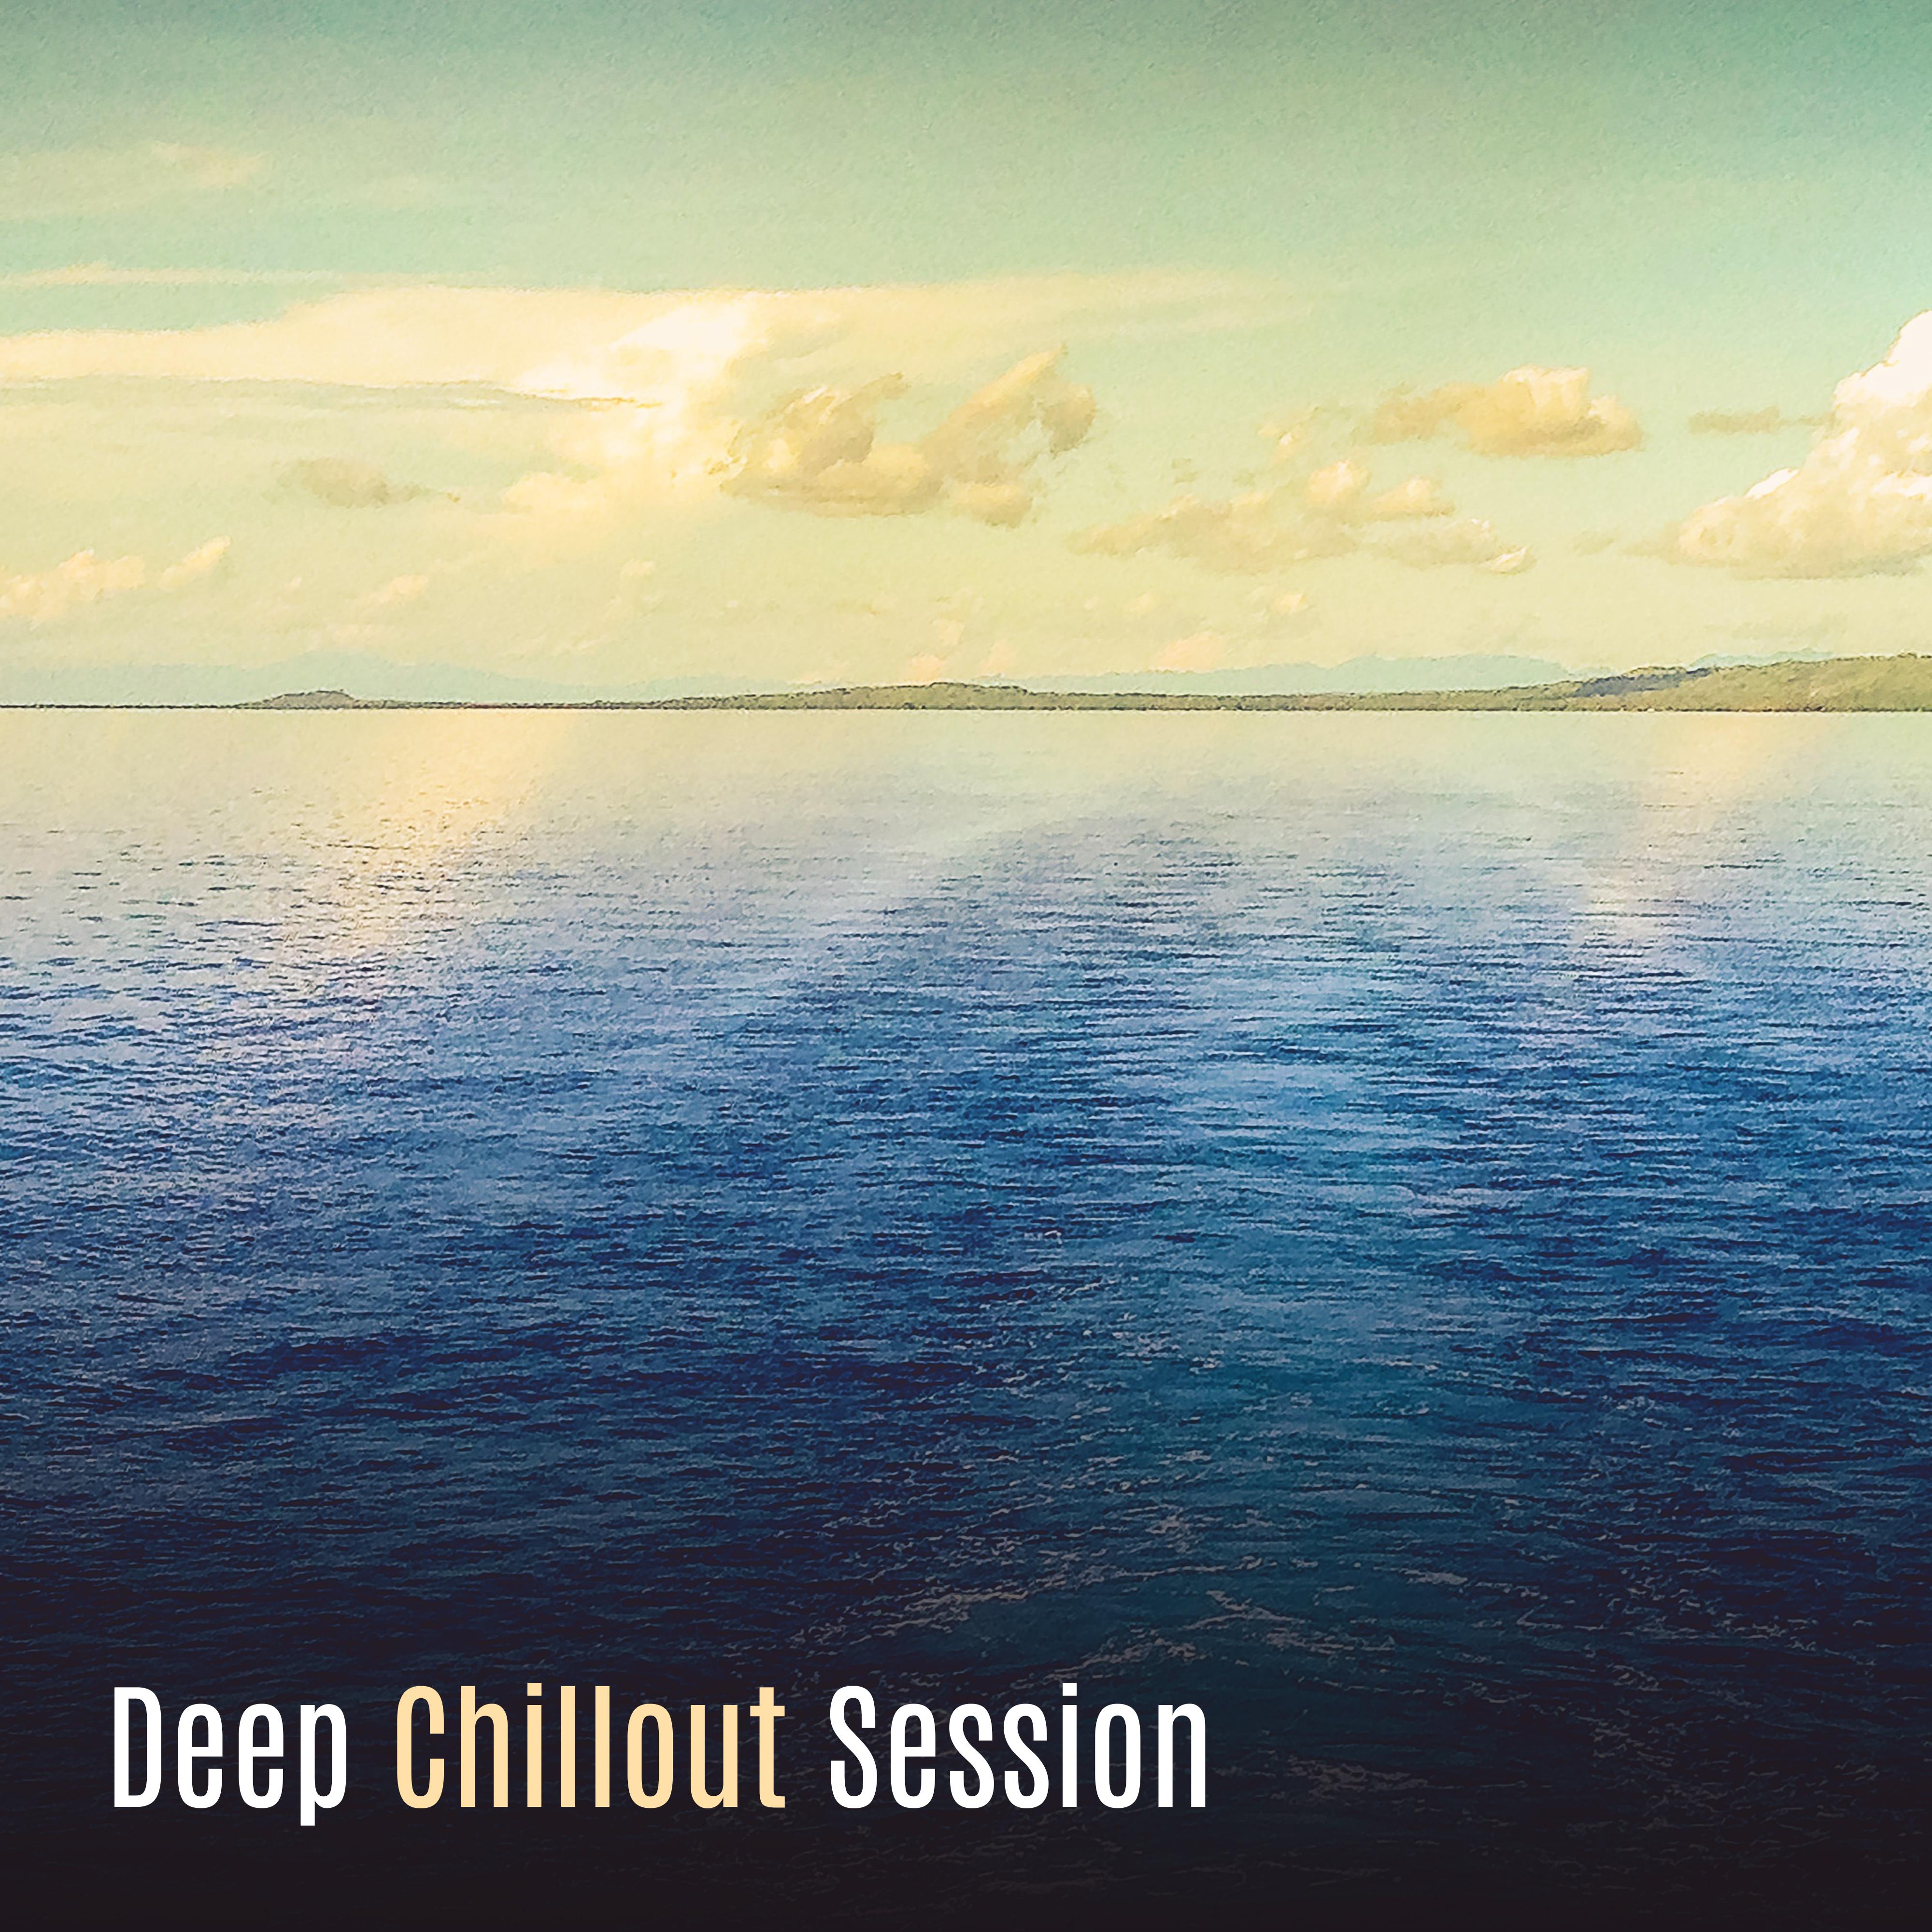 Deep Chillout Session – The Best of Chill Out Music, Siesta, Relax, Rest, Smooth Chillout Vibes